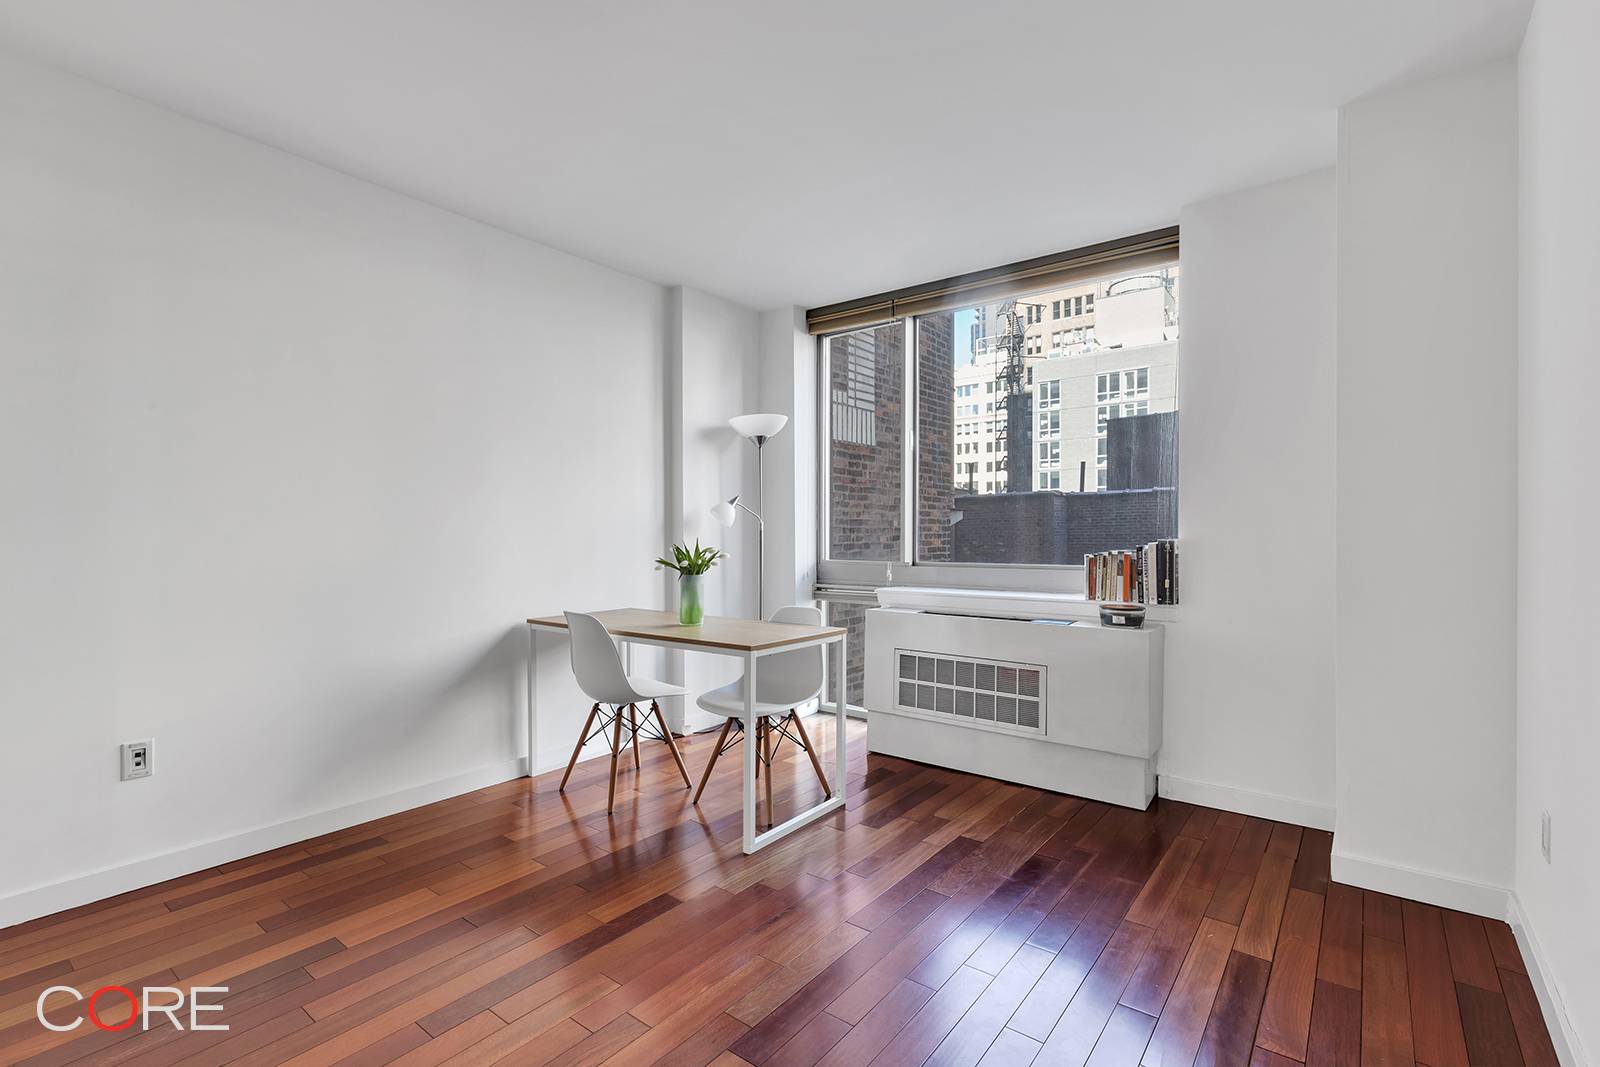 Enjoy living in this beautiful, full service condo building in the heart of Flatiron.